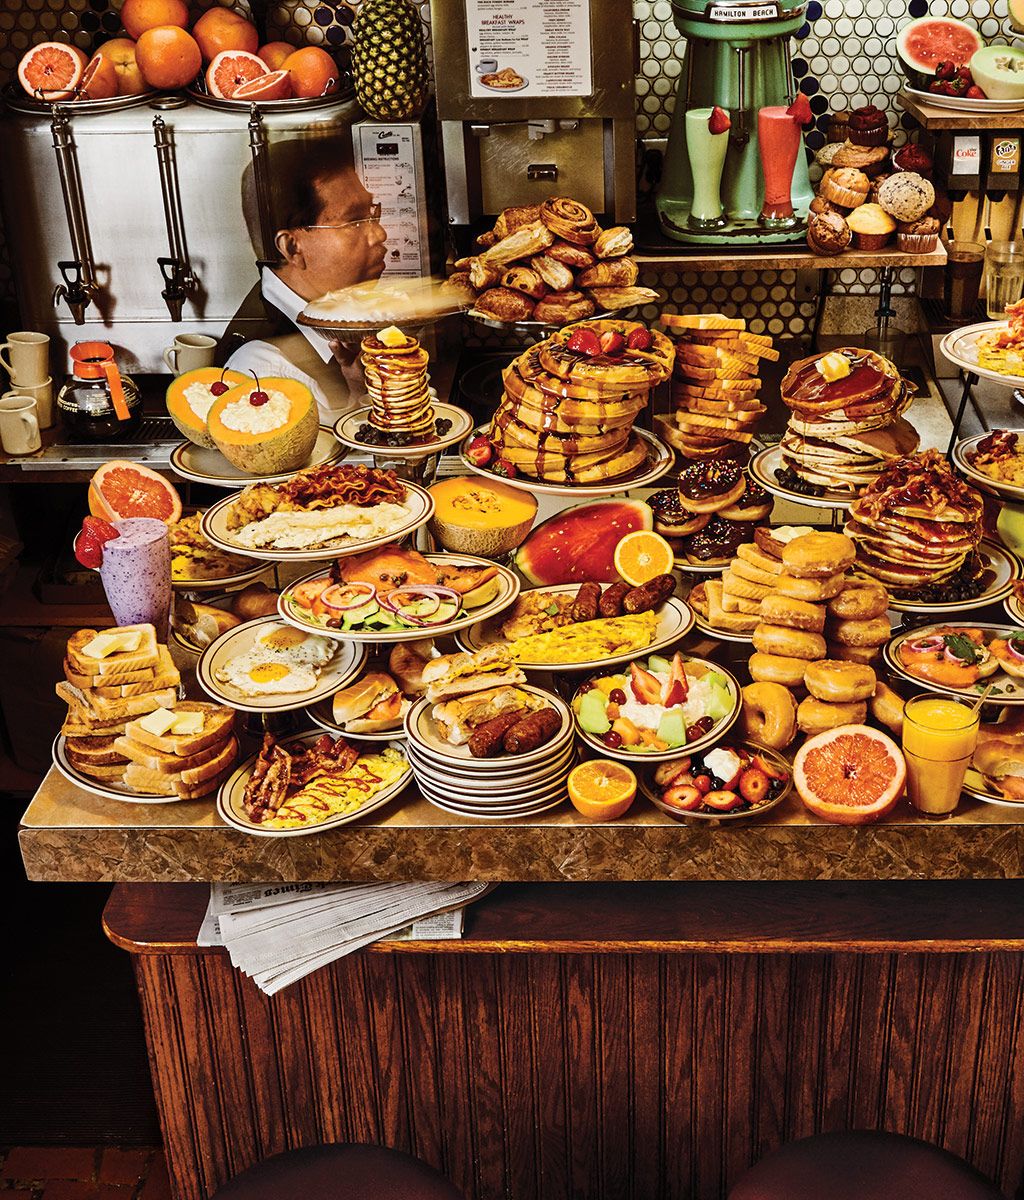 Diner Food - The 20 Best Diners In America : Select a category diner